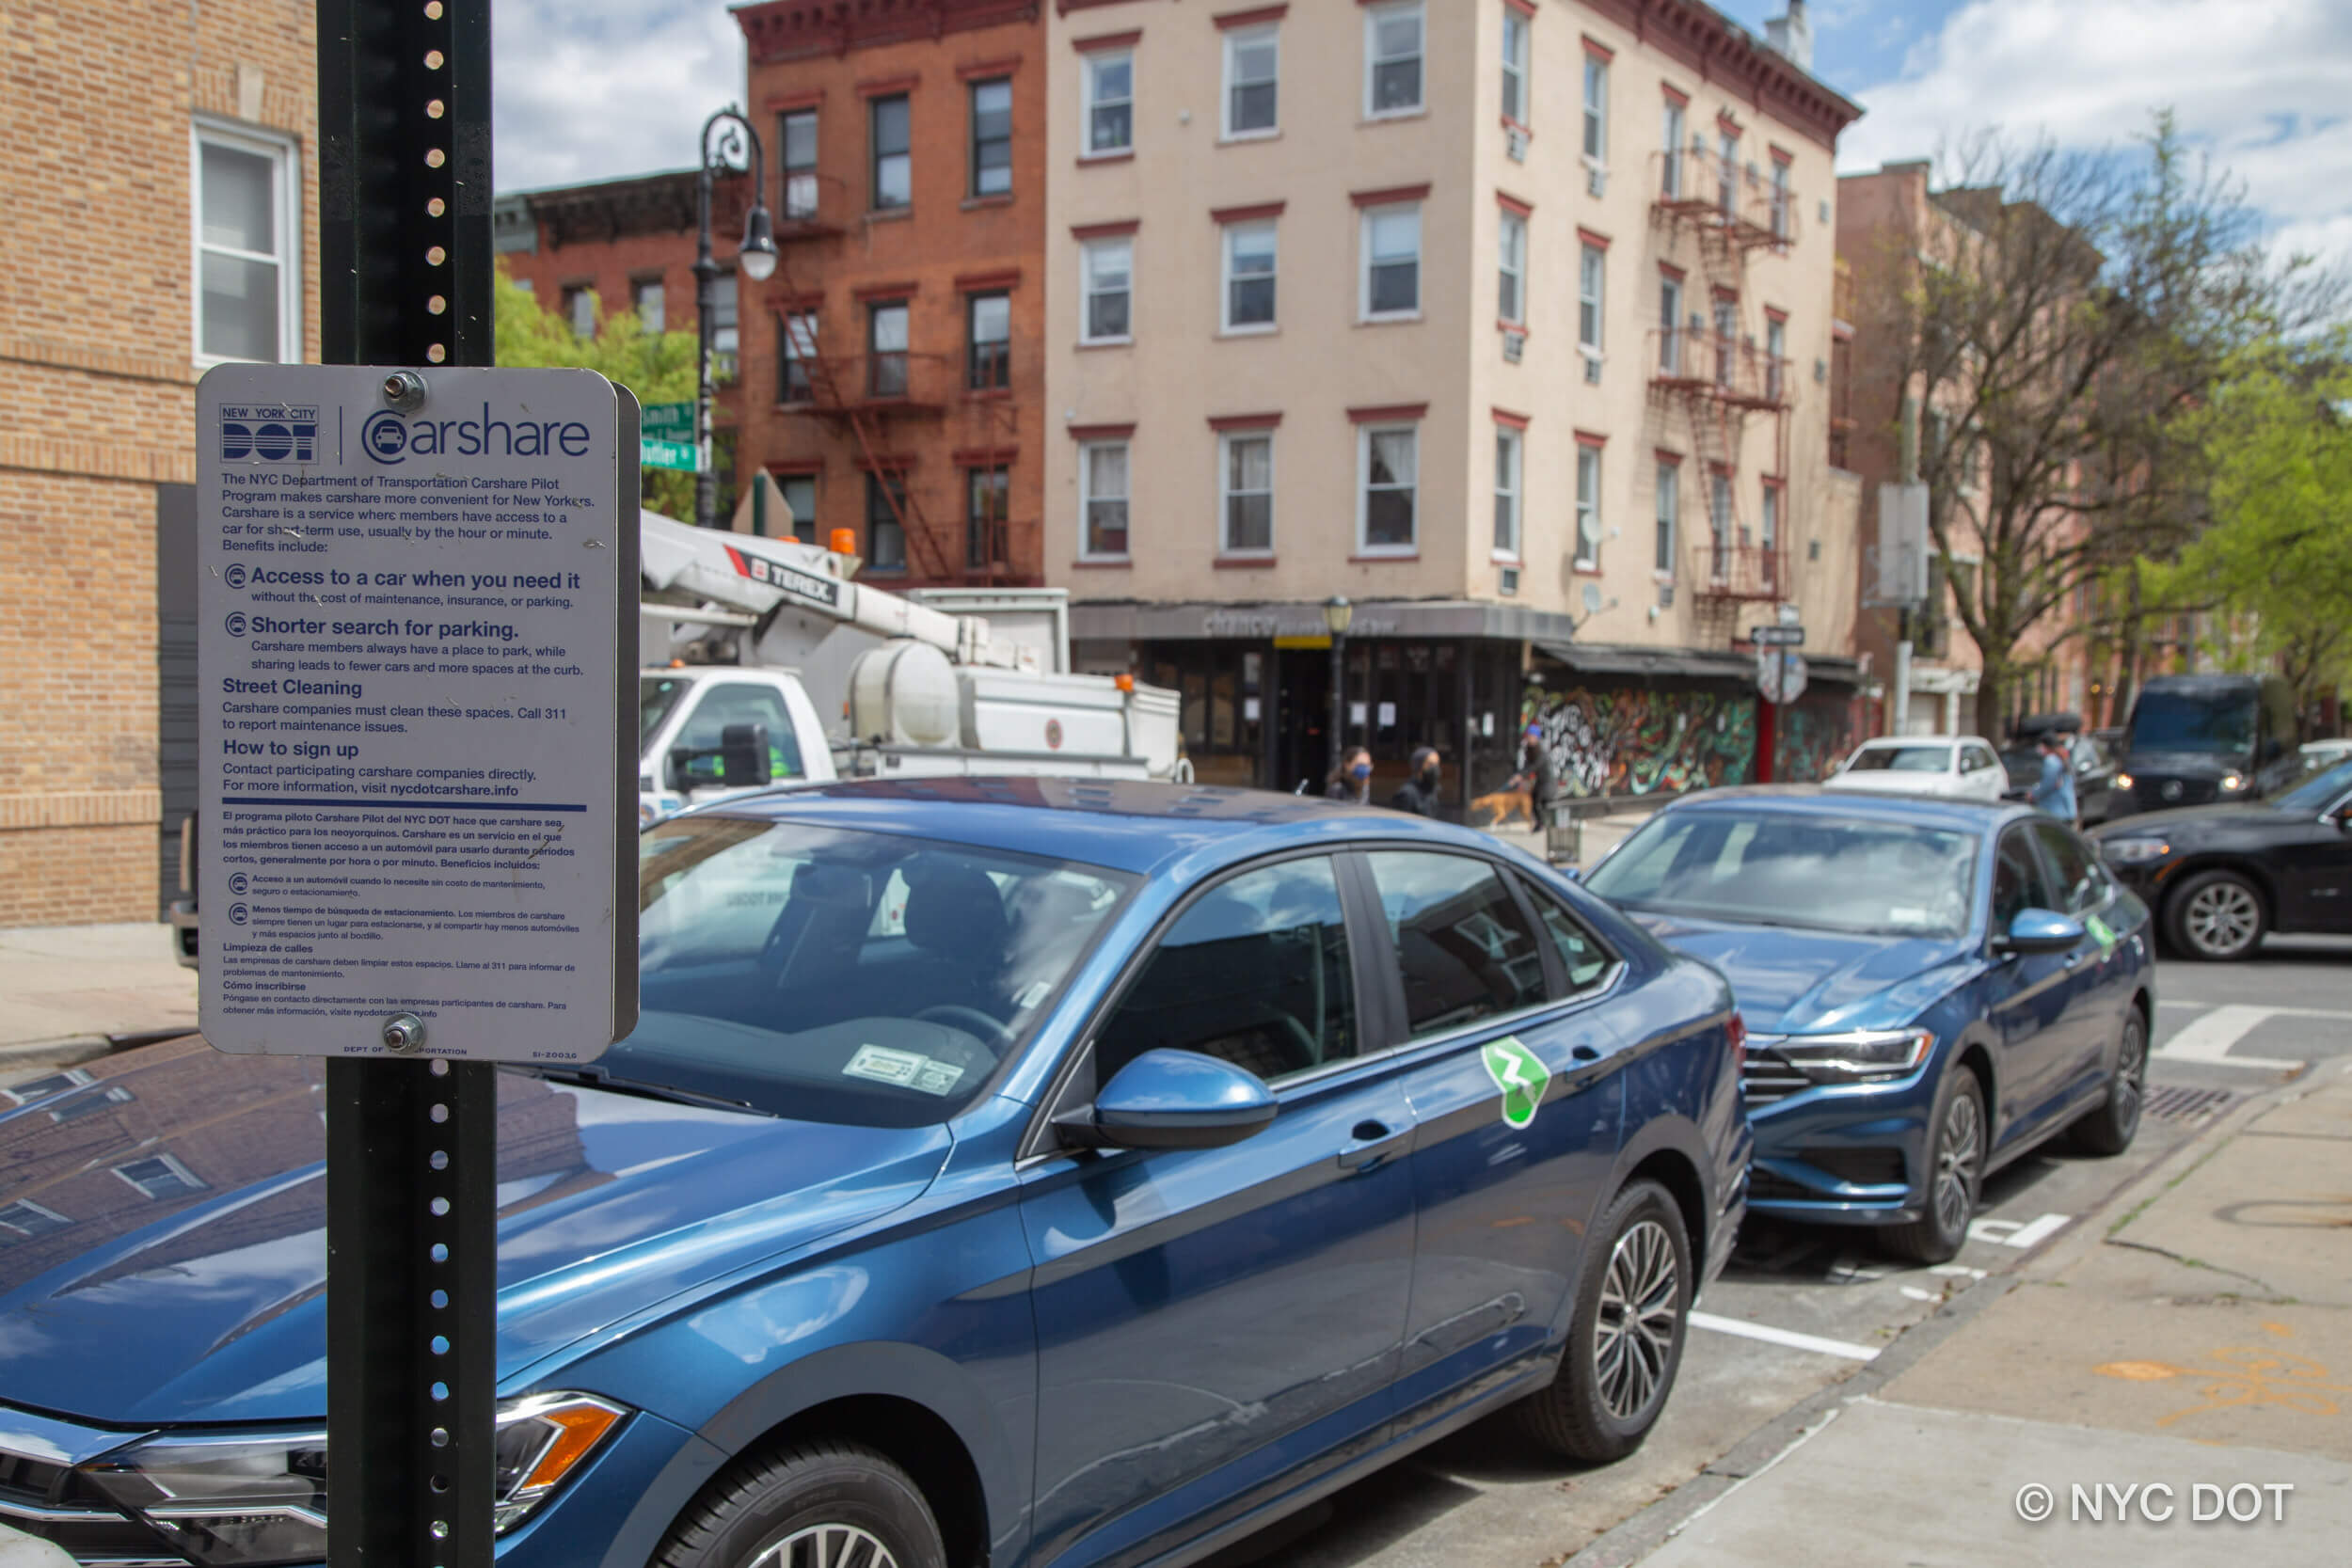 NYC DOT to gobble up more parking spaces, expands carshare program